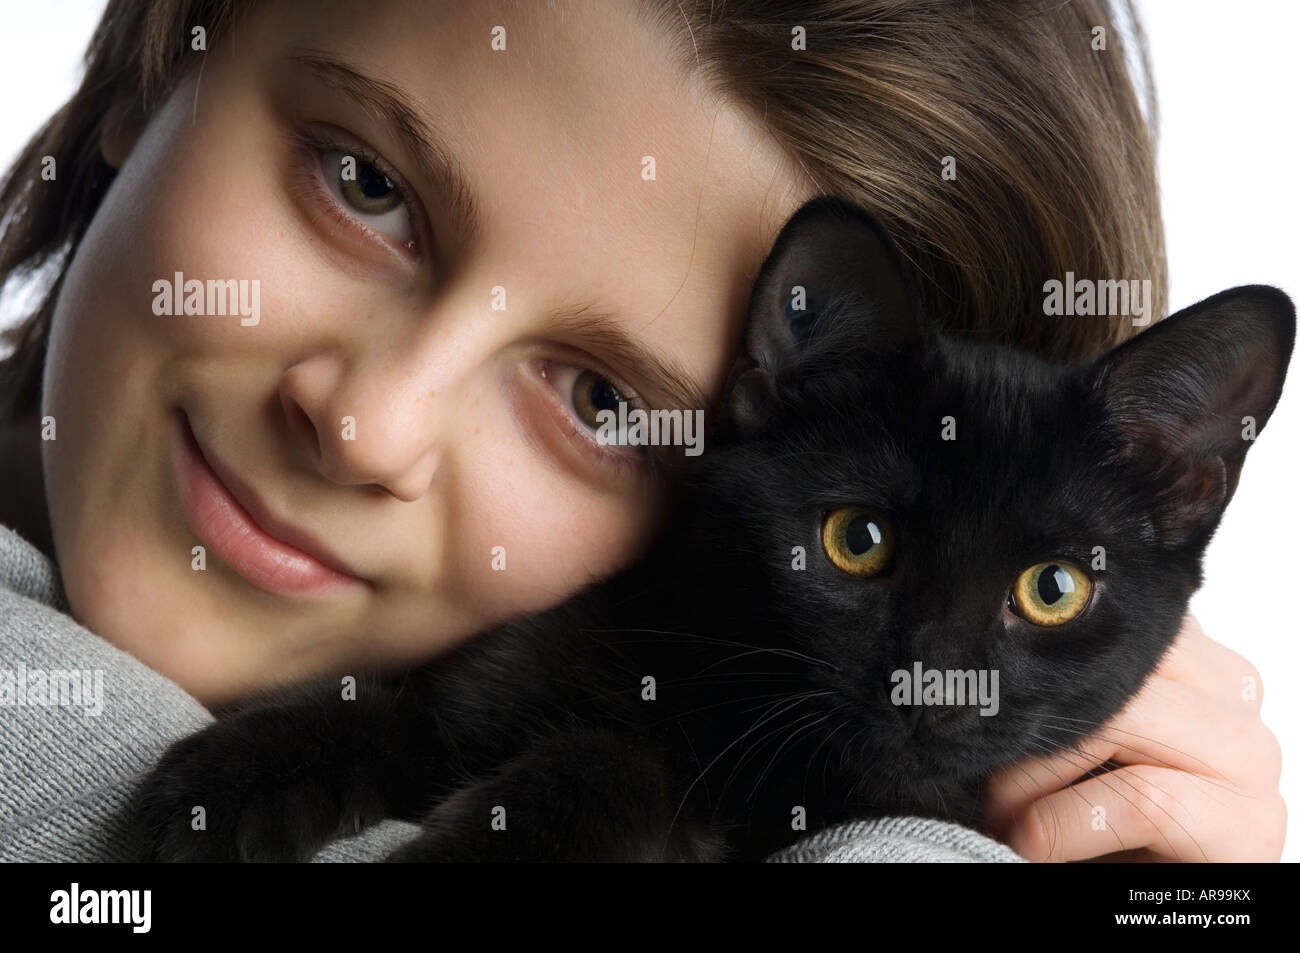 studio close up portrait of a young girl and a black kitten Stock Photo